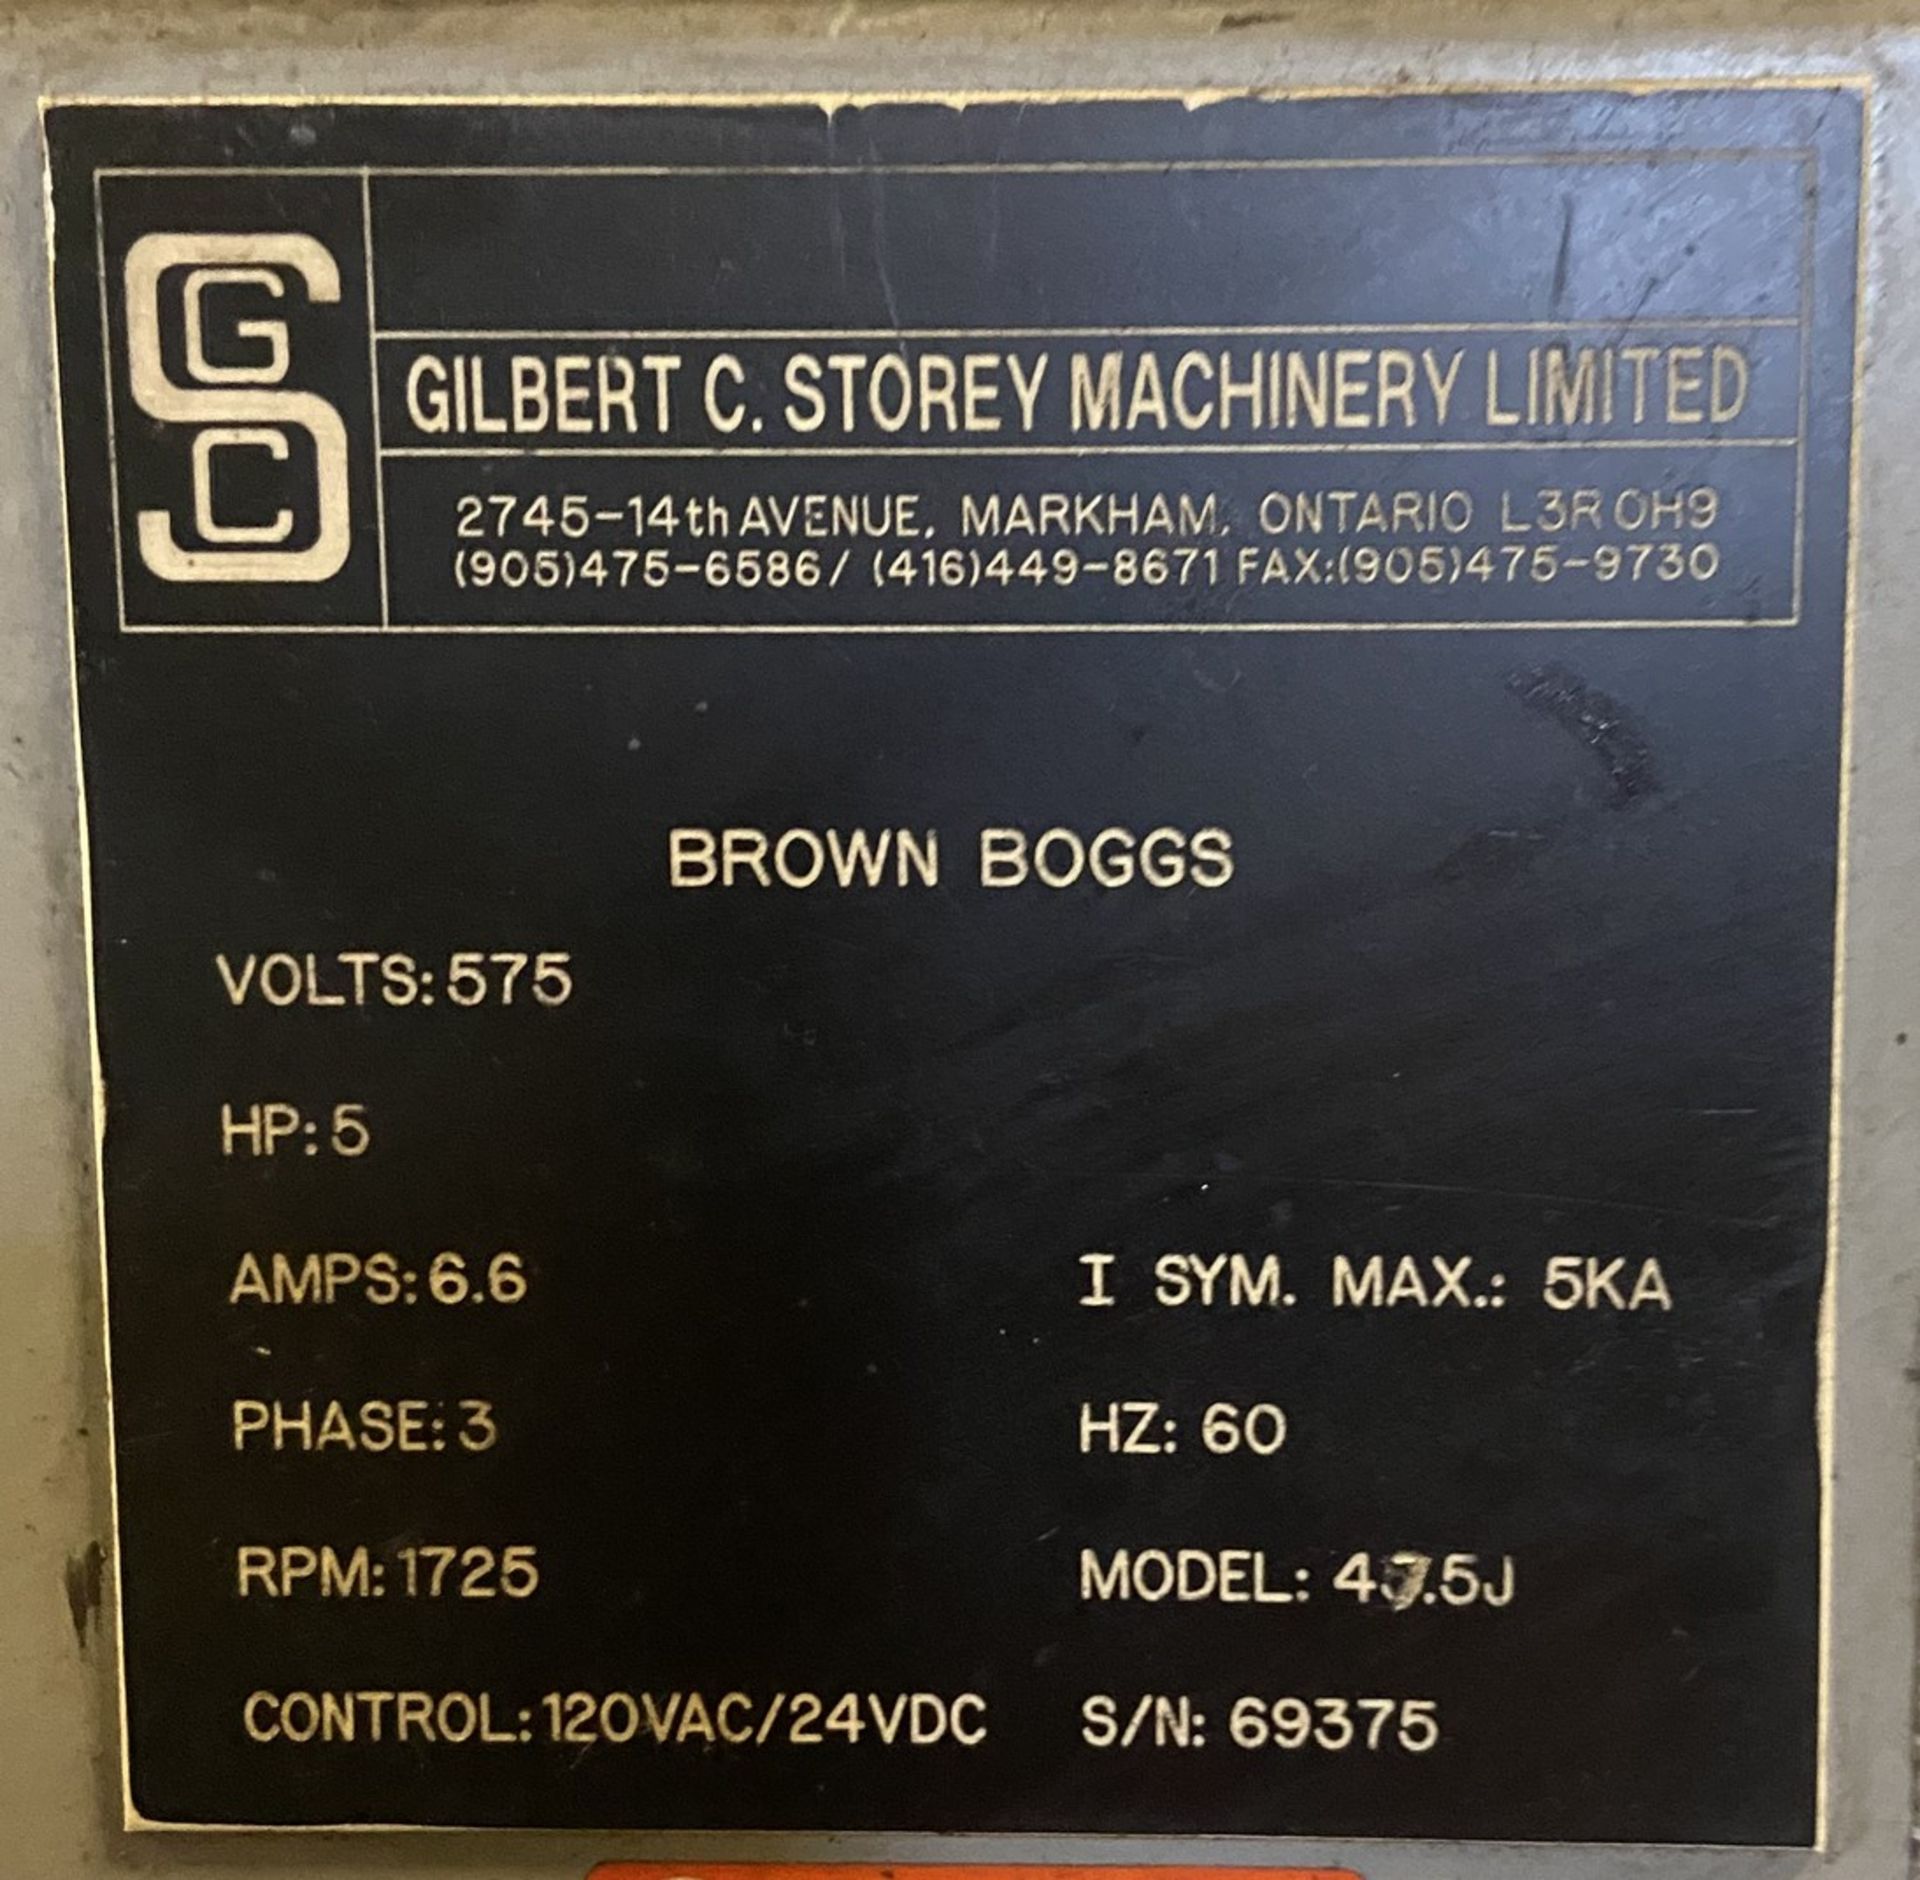 BROWN BOGGS 60 TON OBI PUNCH PRESS, 5 HP, 3/60/575 VOLTS, HONEYWELL WPC 2000 CLUTCH/BRAKE - Image 10 of 12